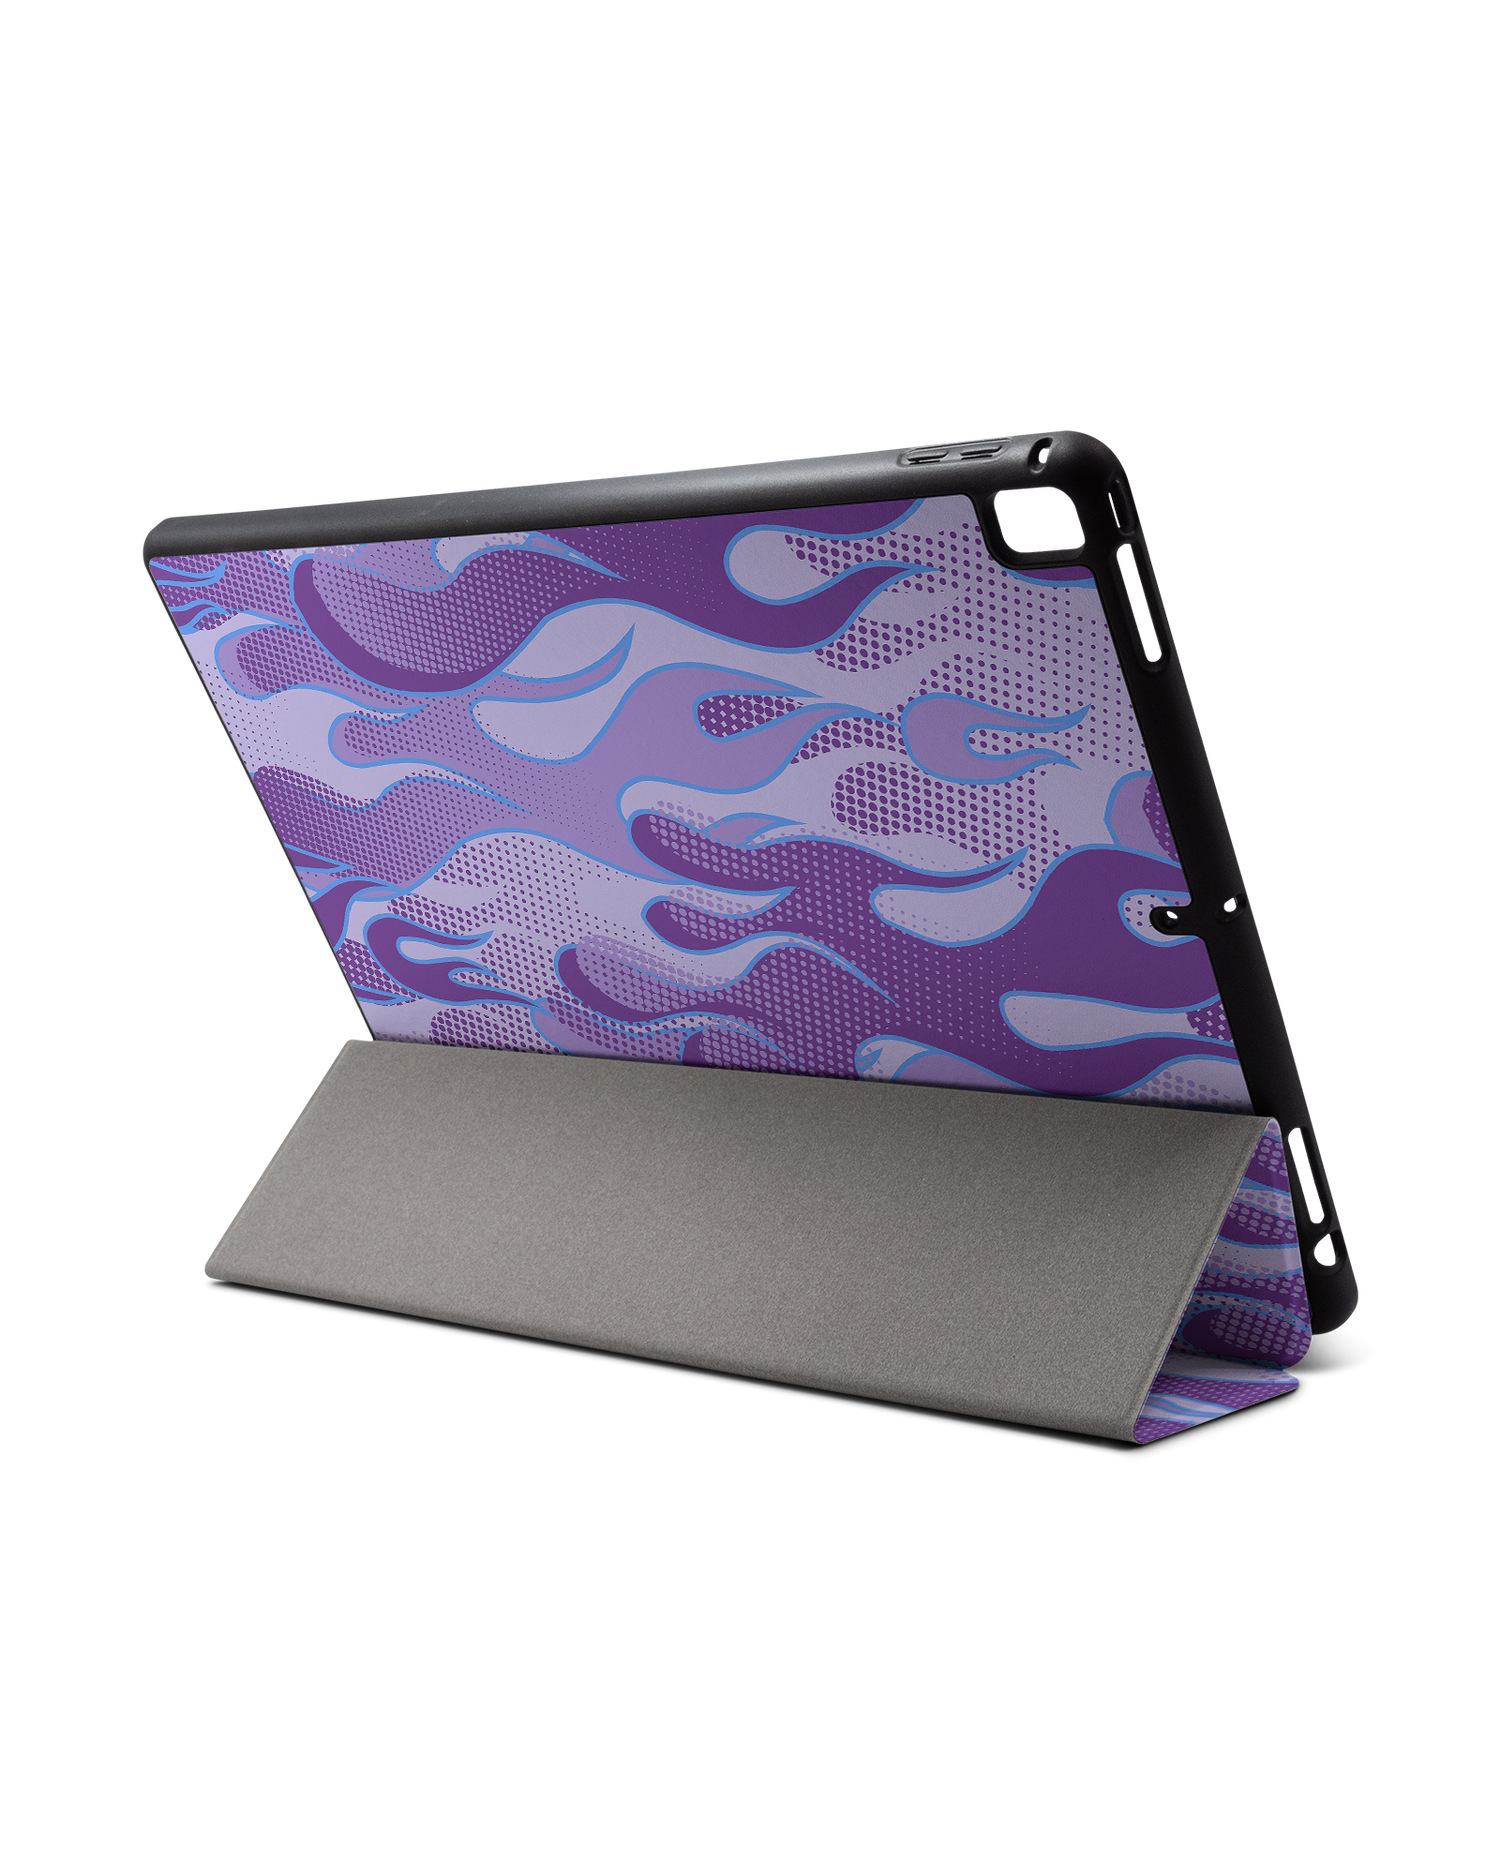 Purple Flames iPad Case with Pencil Holder for Apple iPad Pro 2 12.9